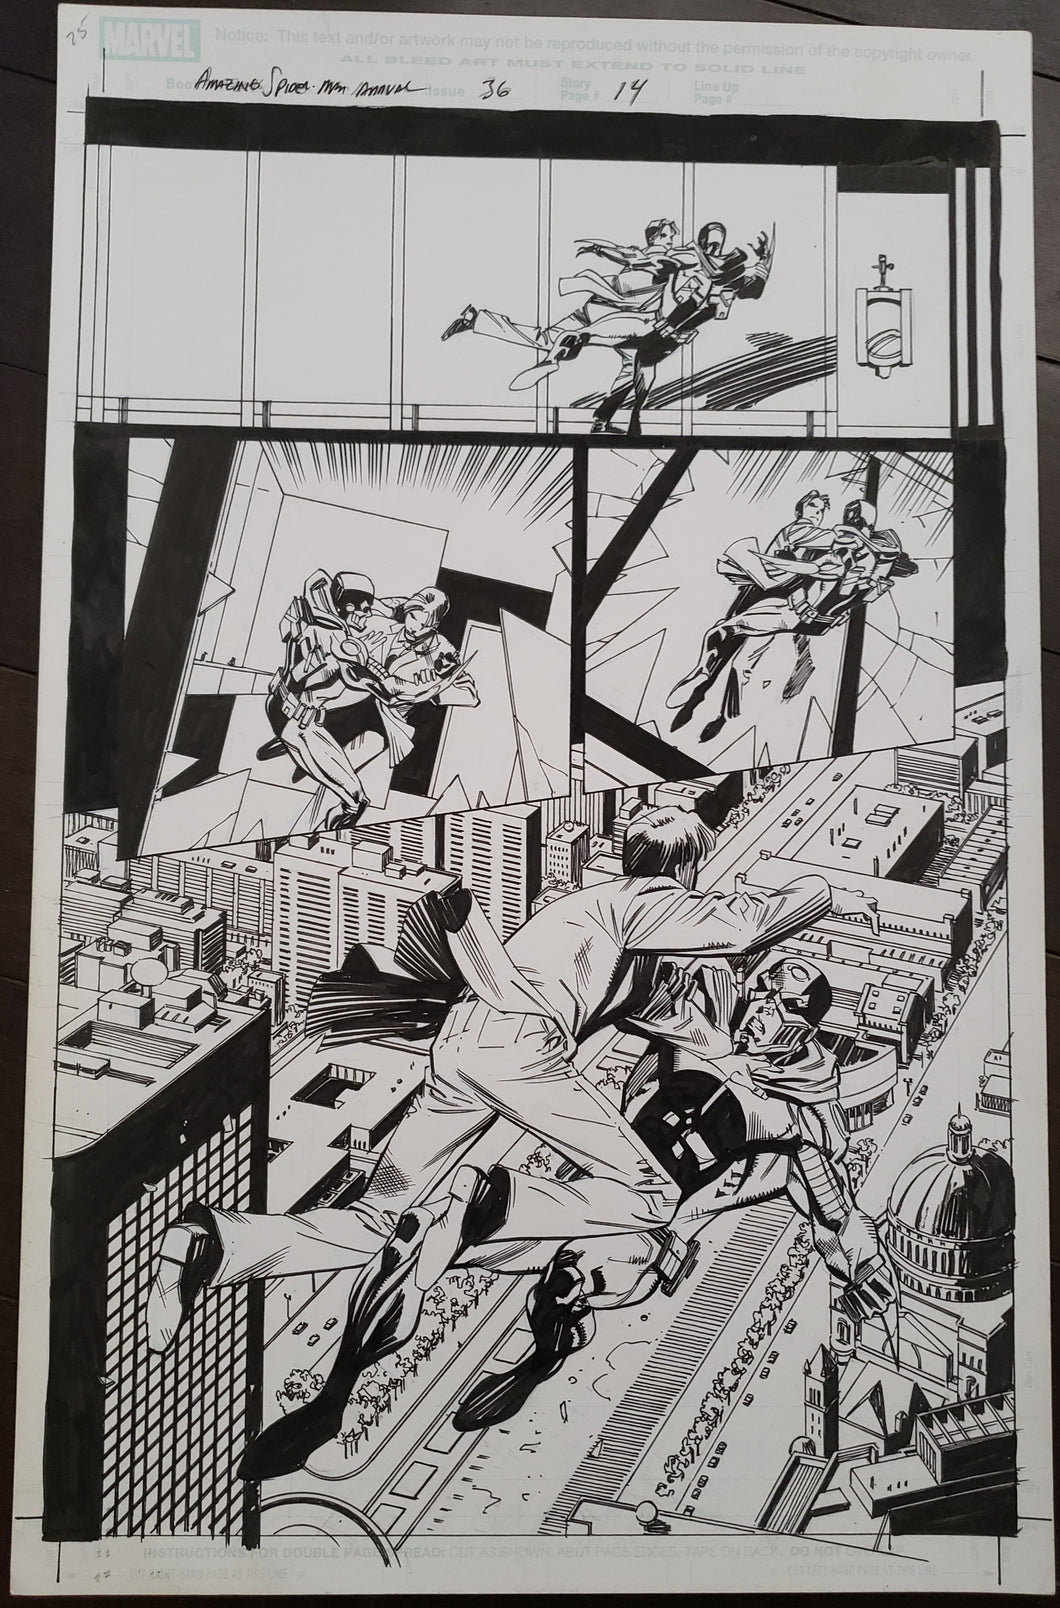 Amazing Spider-Man Annual 36 - Page 14 - Pat Oliffe / Andy Lanning - FIRST APPEARANCE!!